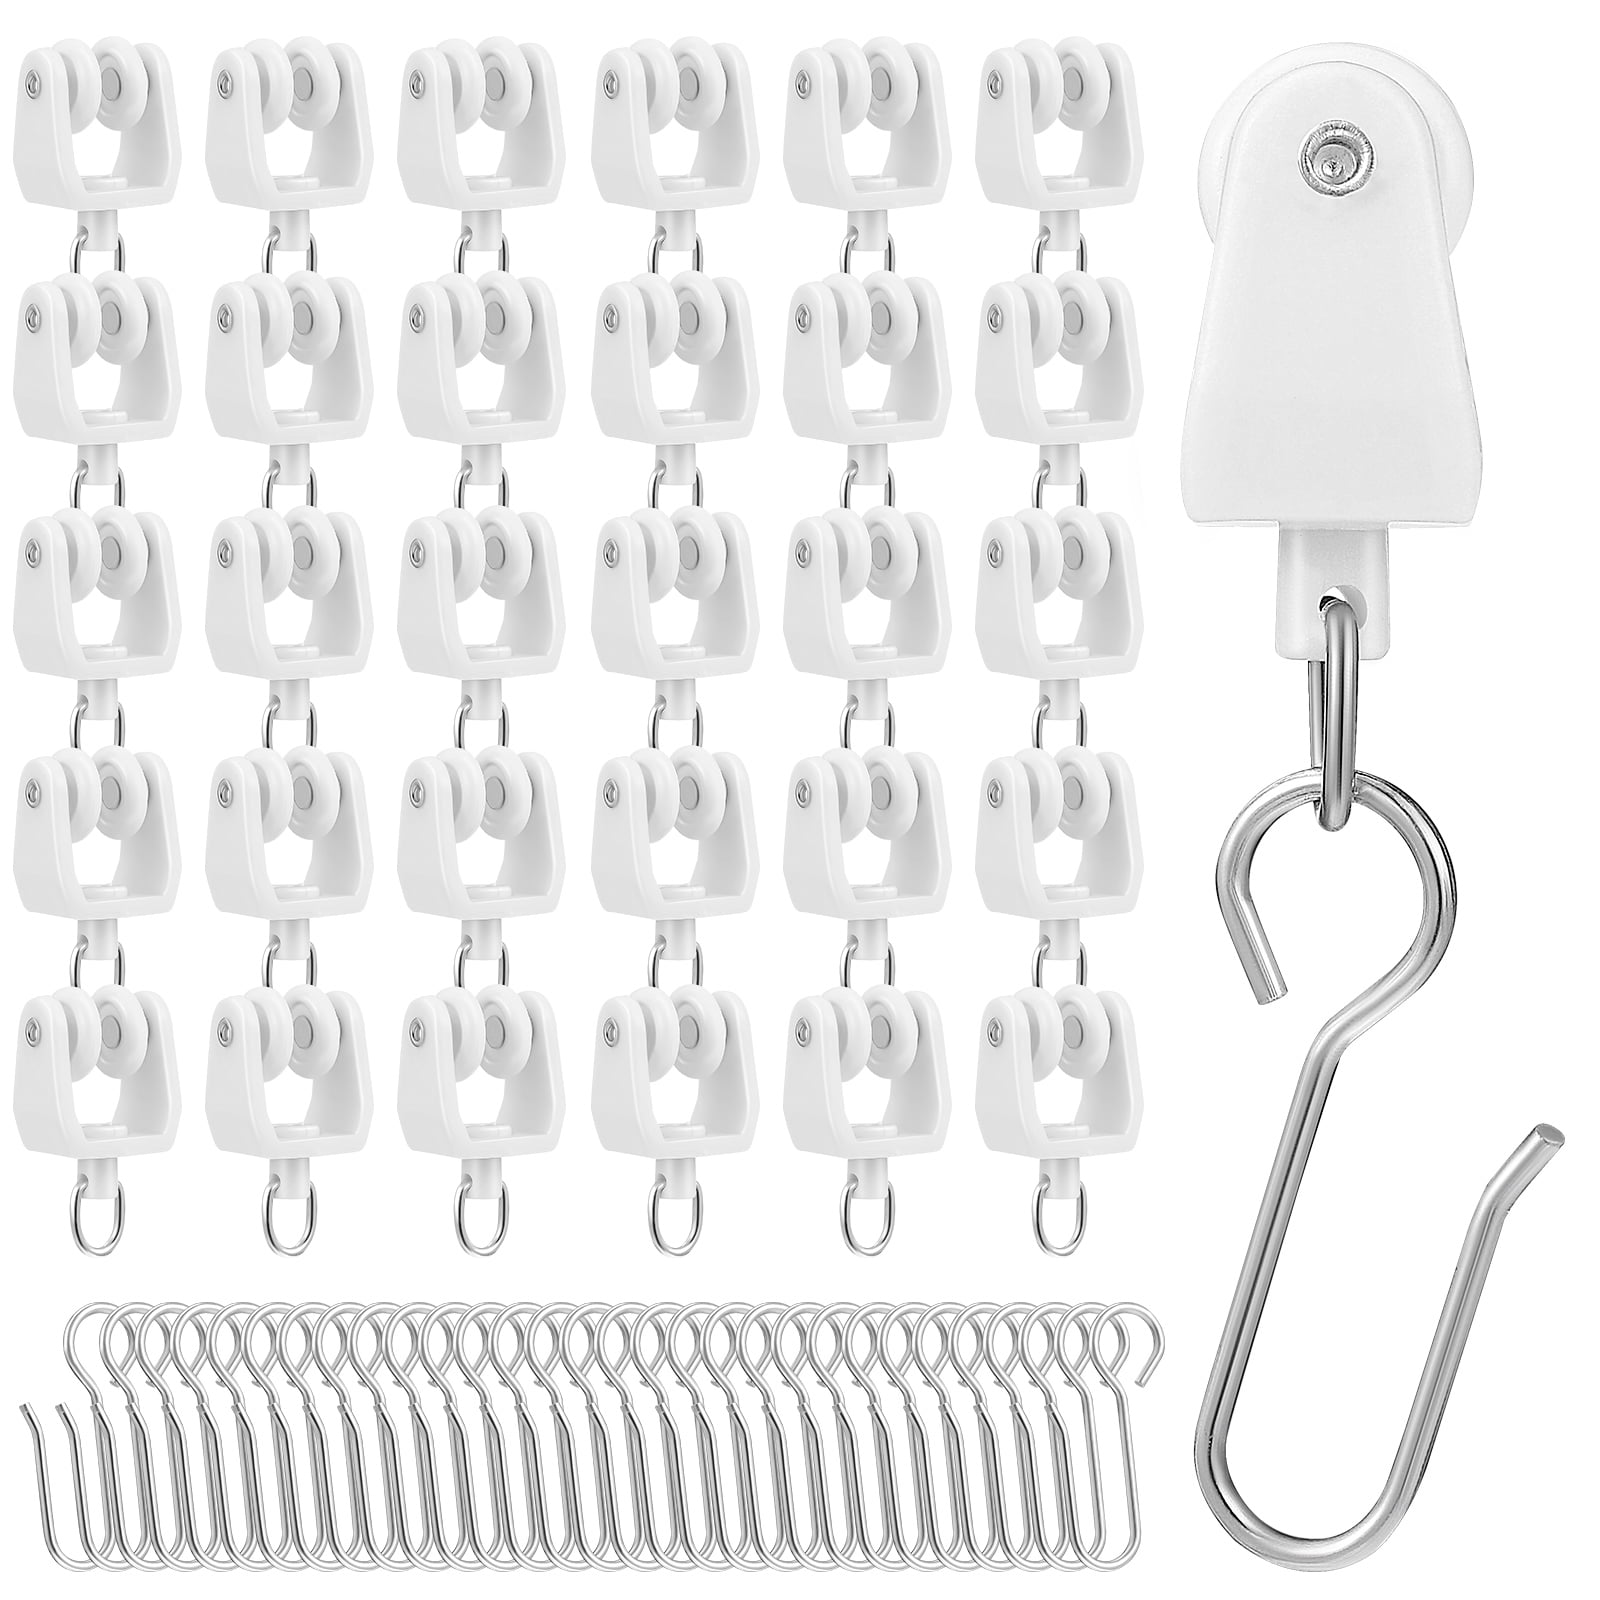 Curtain Tracks Accessories (10 Pack Curtain Track Roller Hooks)